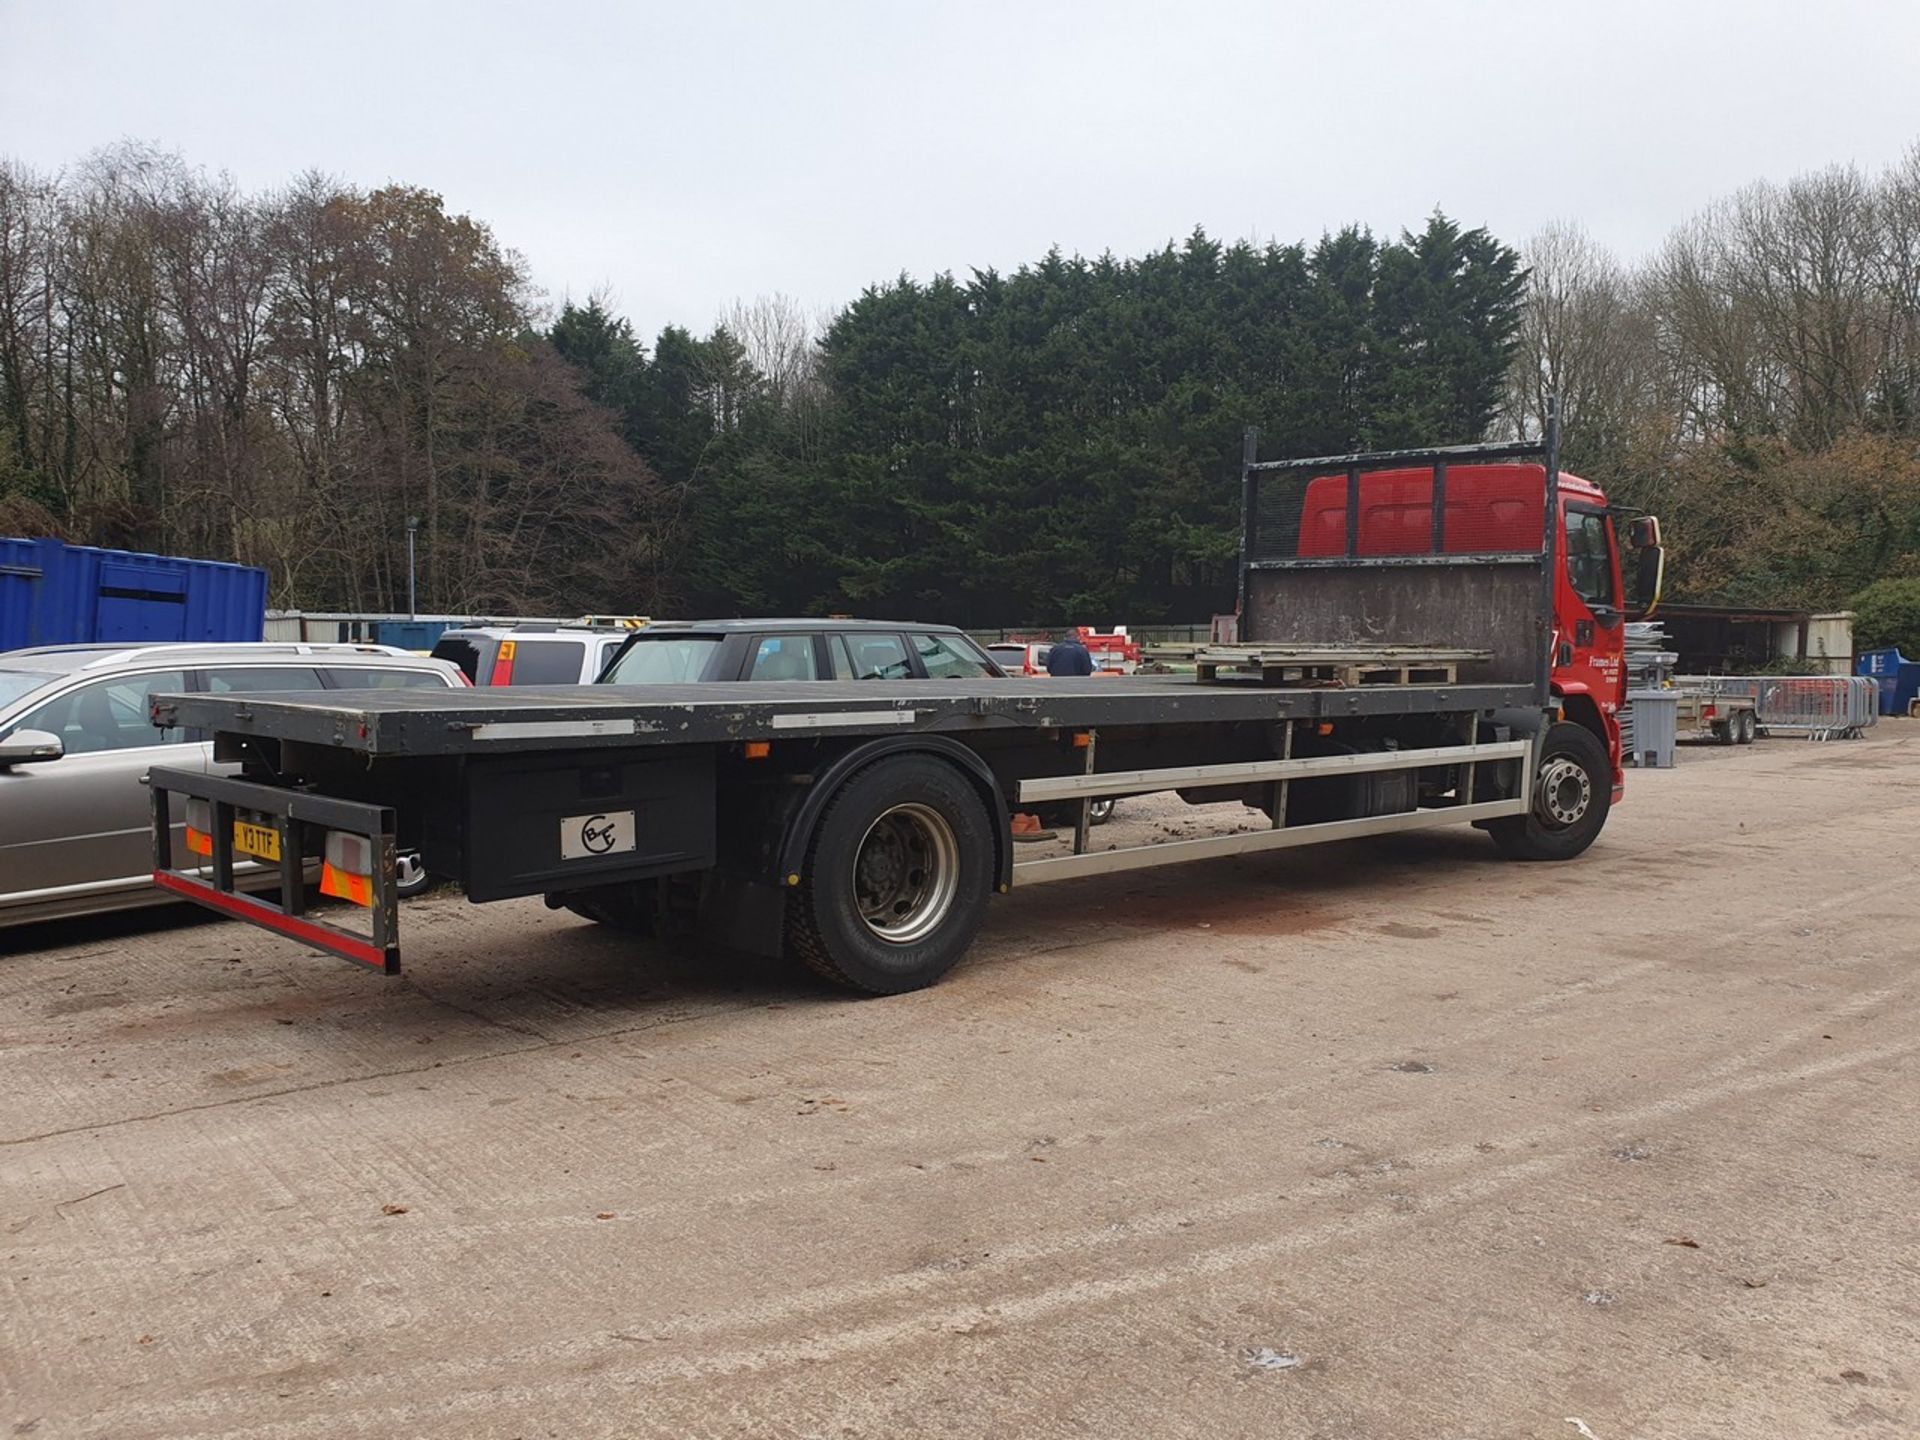 13/13 DAF TRUCKS FLAT BED - 6693cc 2dr (Red) - Image 21 of 23